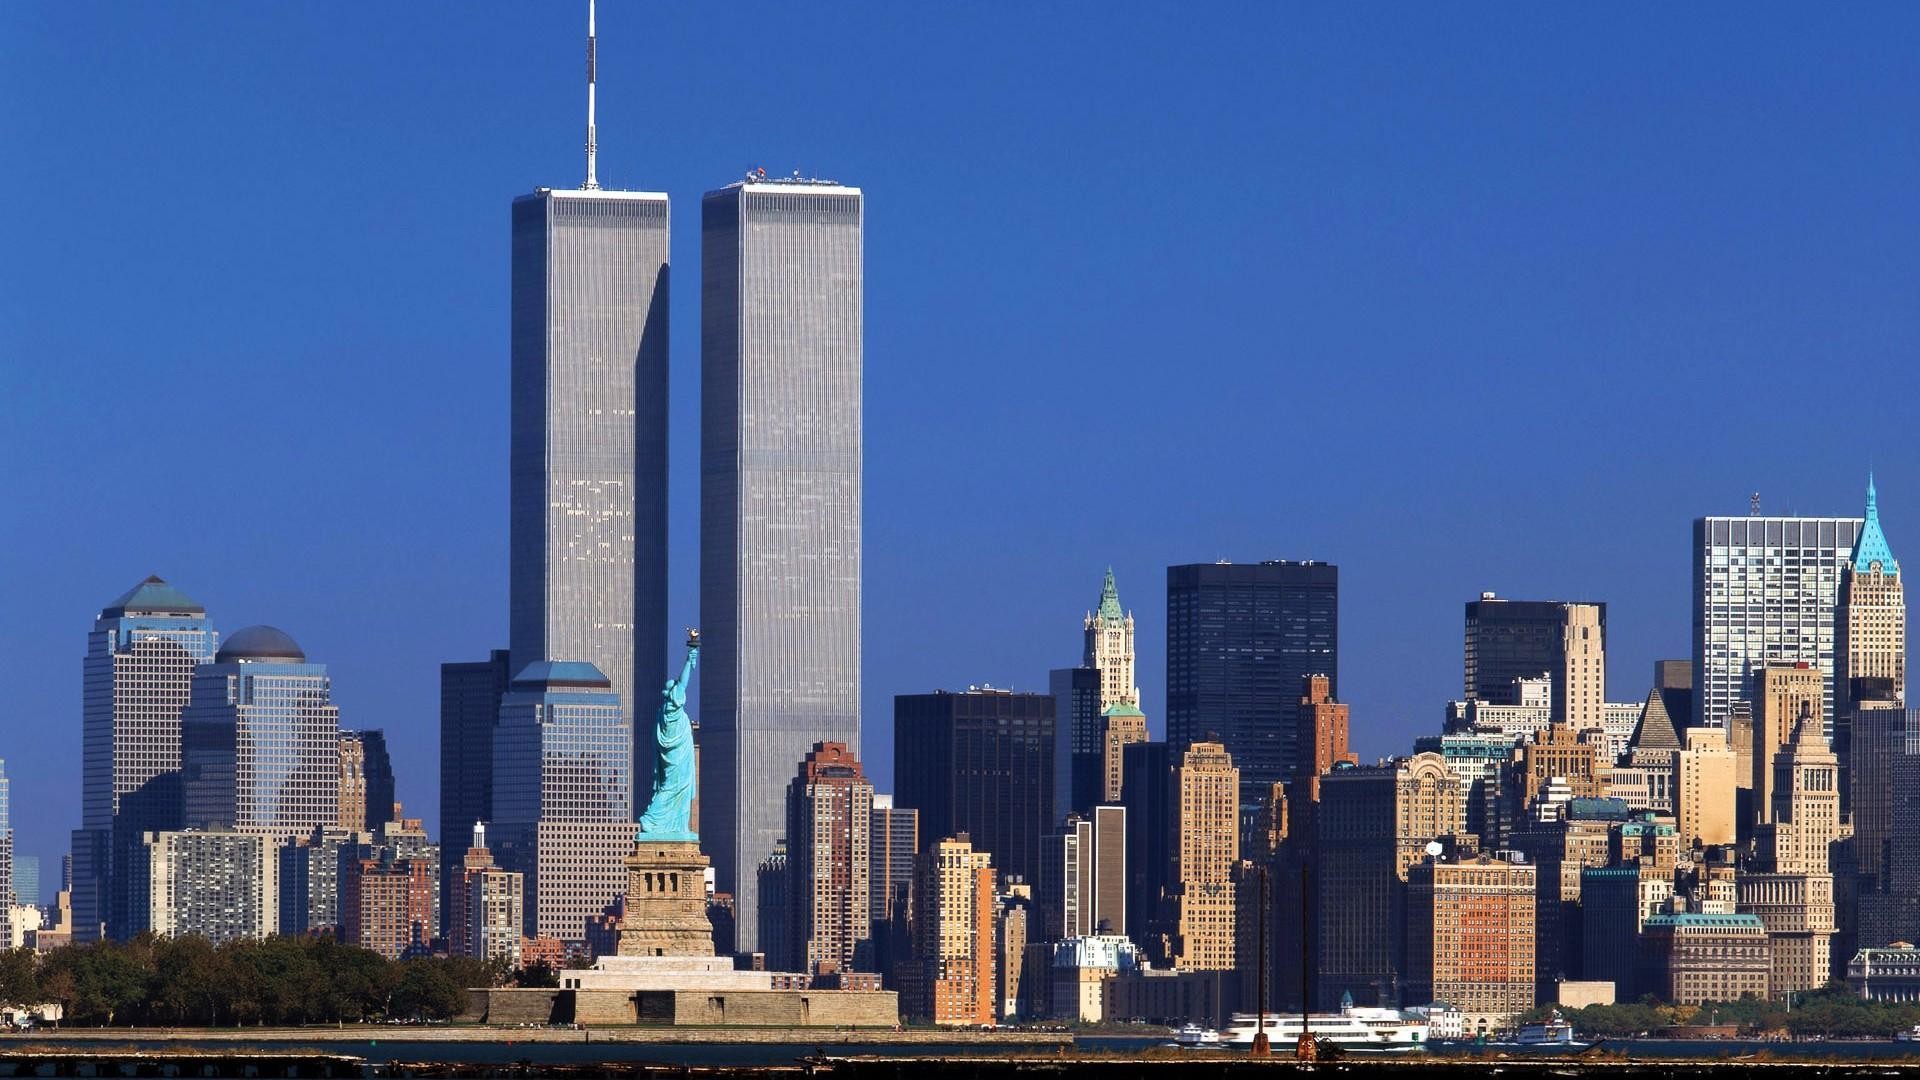 1920x1080 Wallpapers of the twin towers in New York  1080p hd .